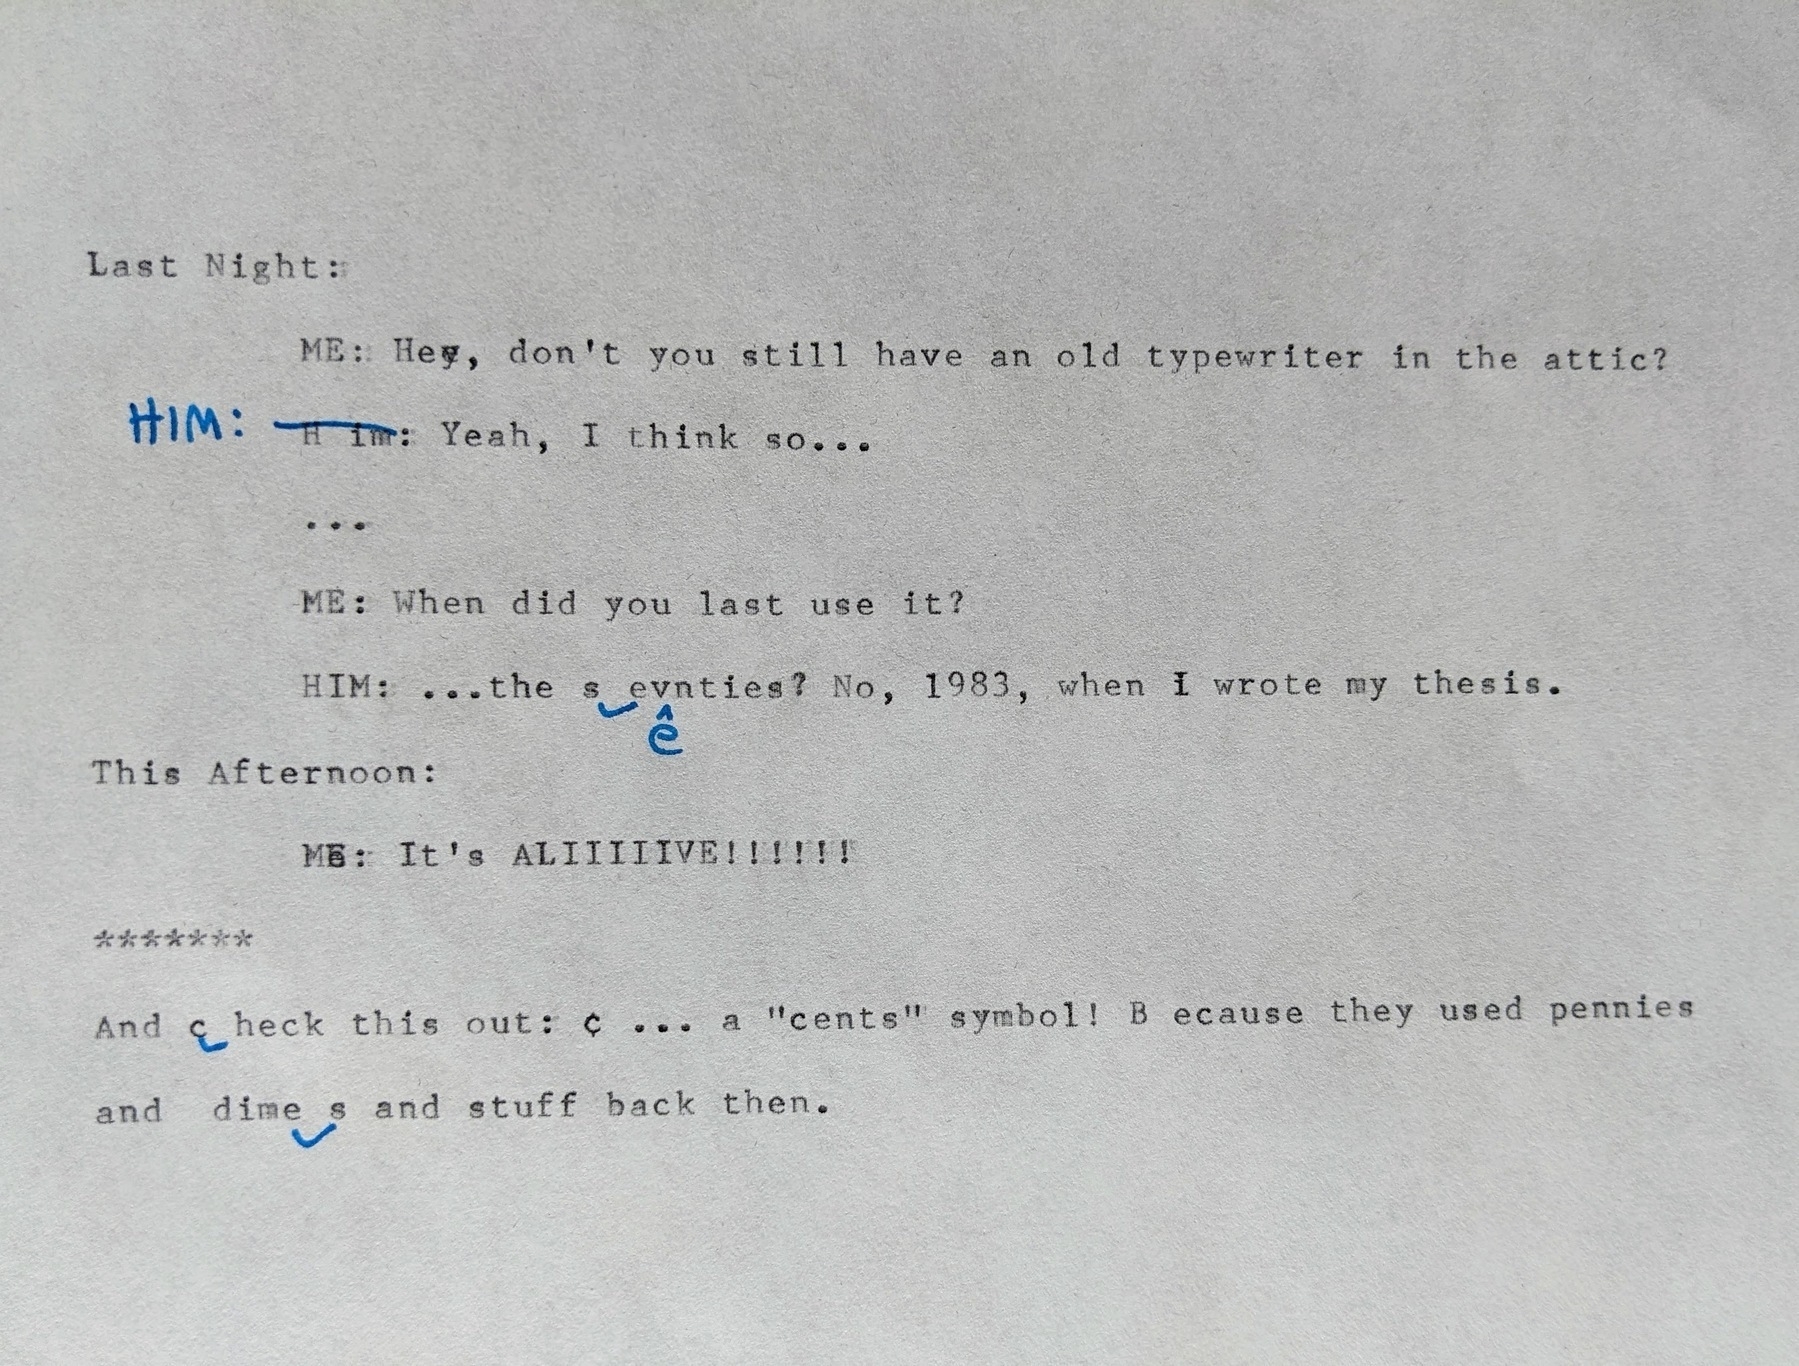 a page with a typewritten dialogue indicating the typewriter dates from the mid-twentieth century